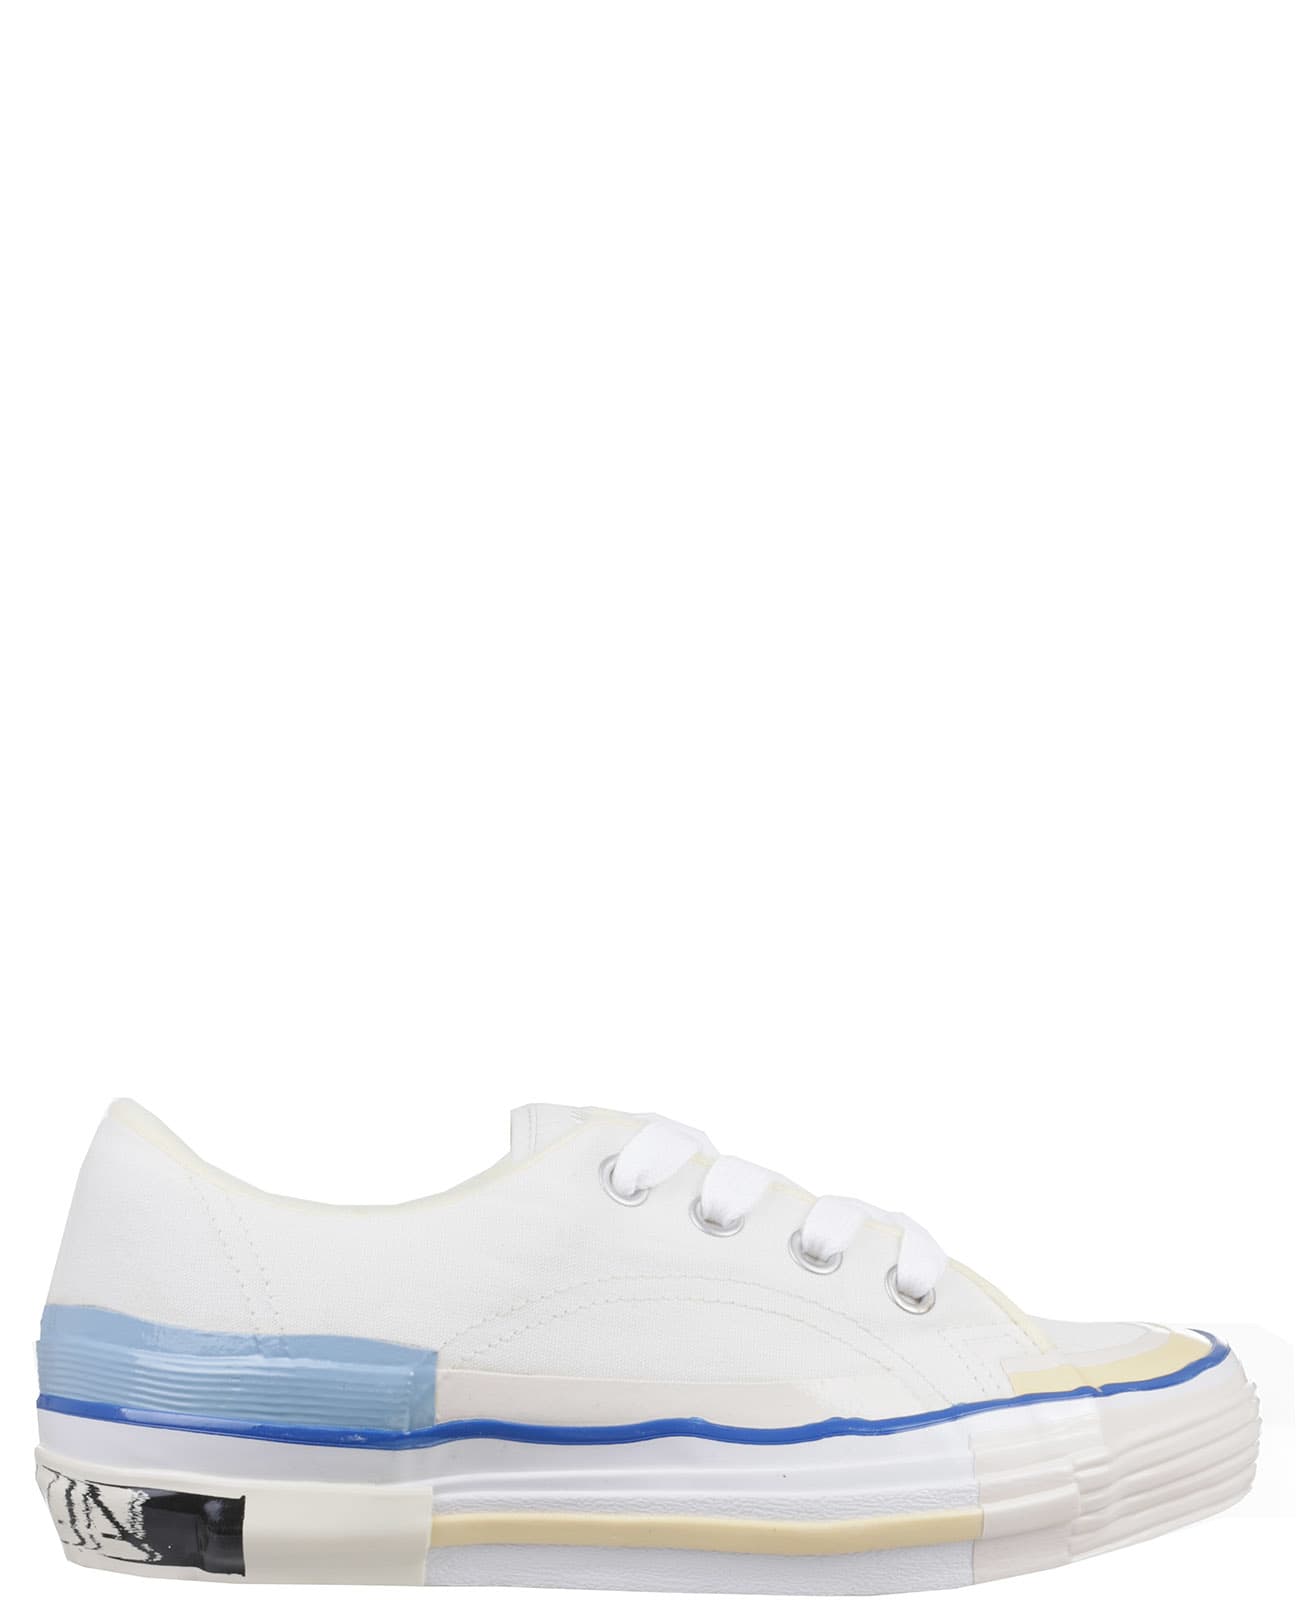 LANVIN MELTED SNEAKERS,FM-SKIK00-CANV-E21 0100